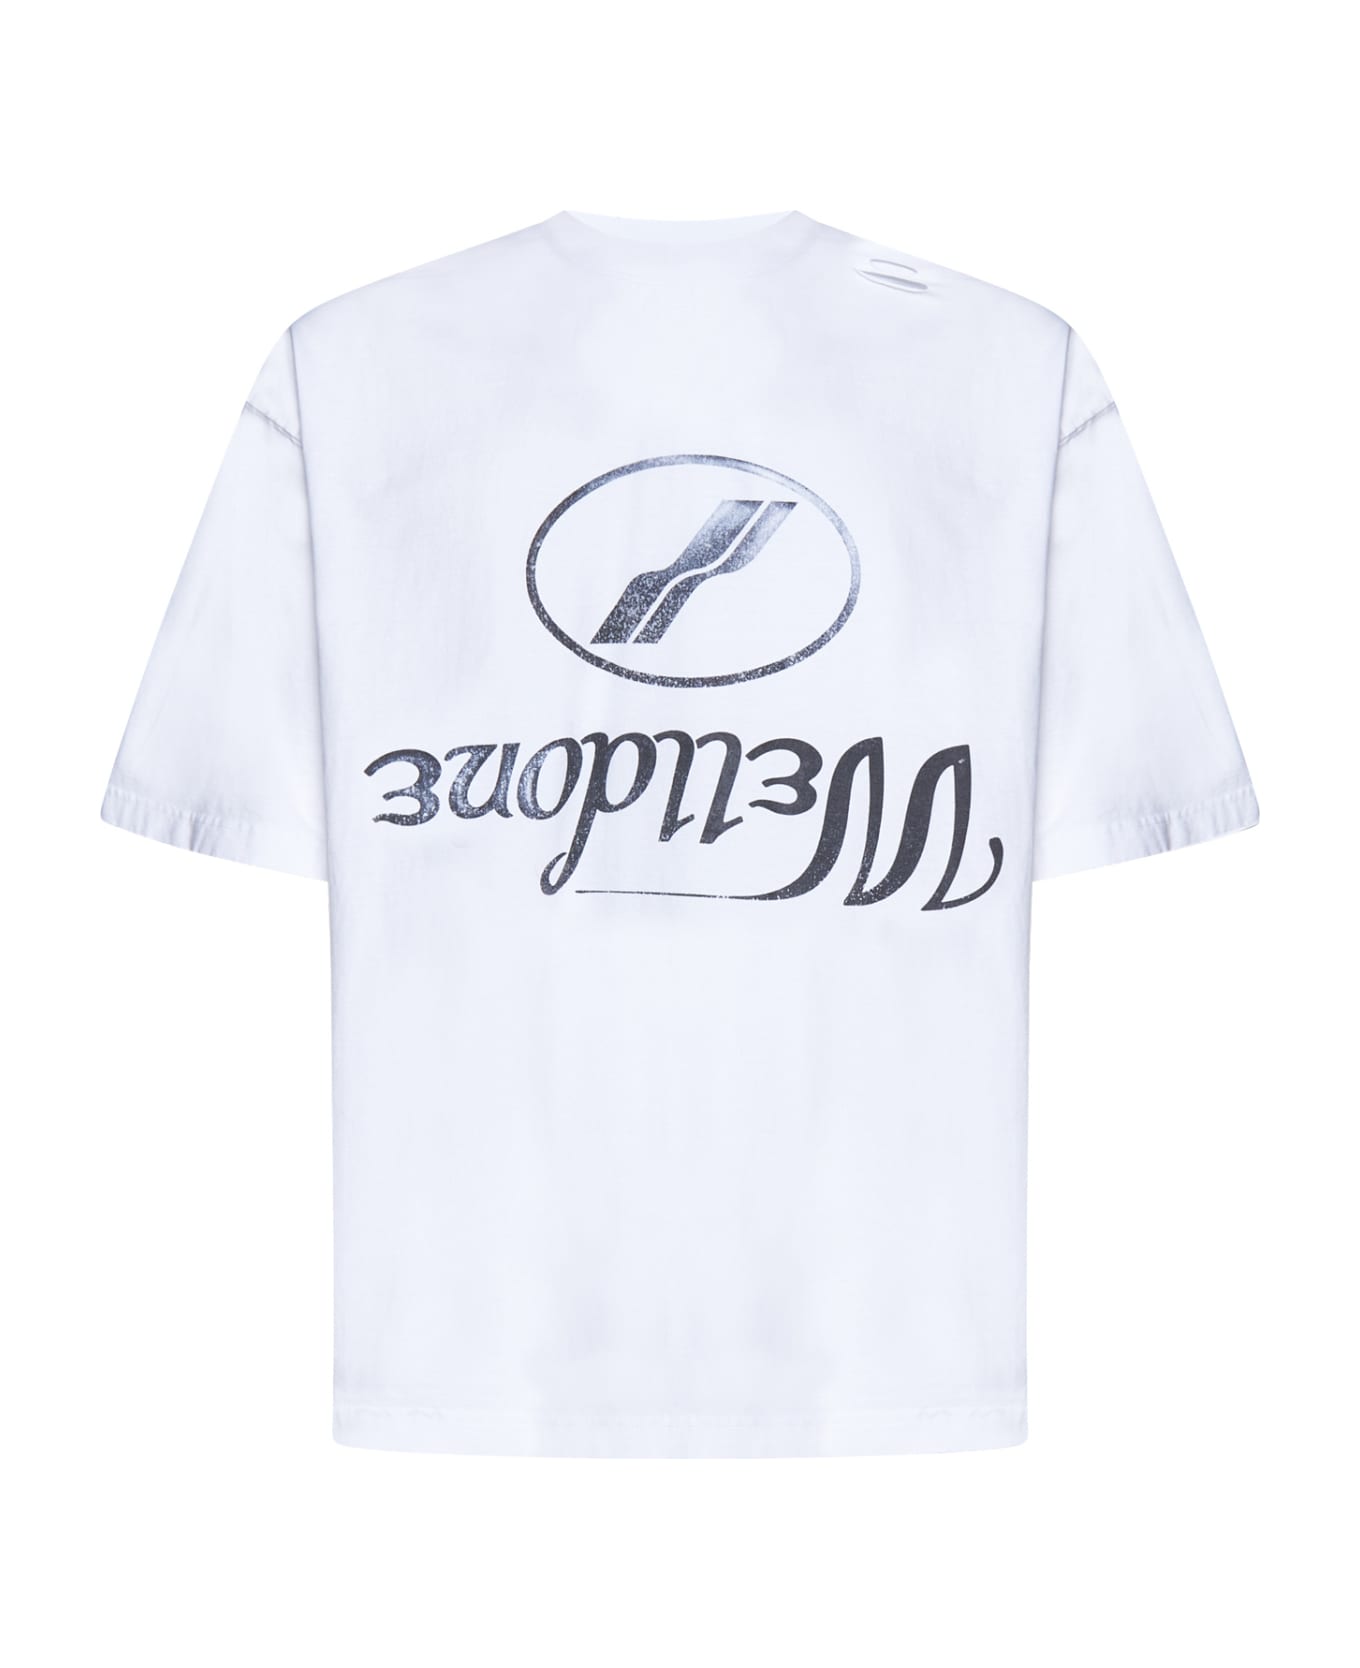 WE11 DONE T-Shirt - White シャツ